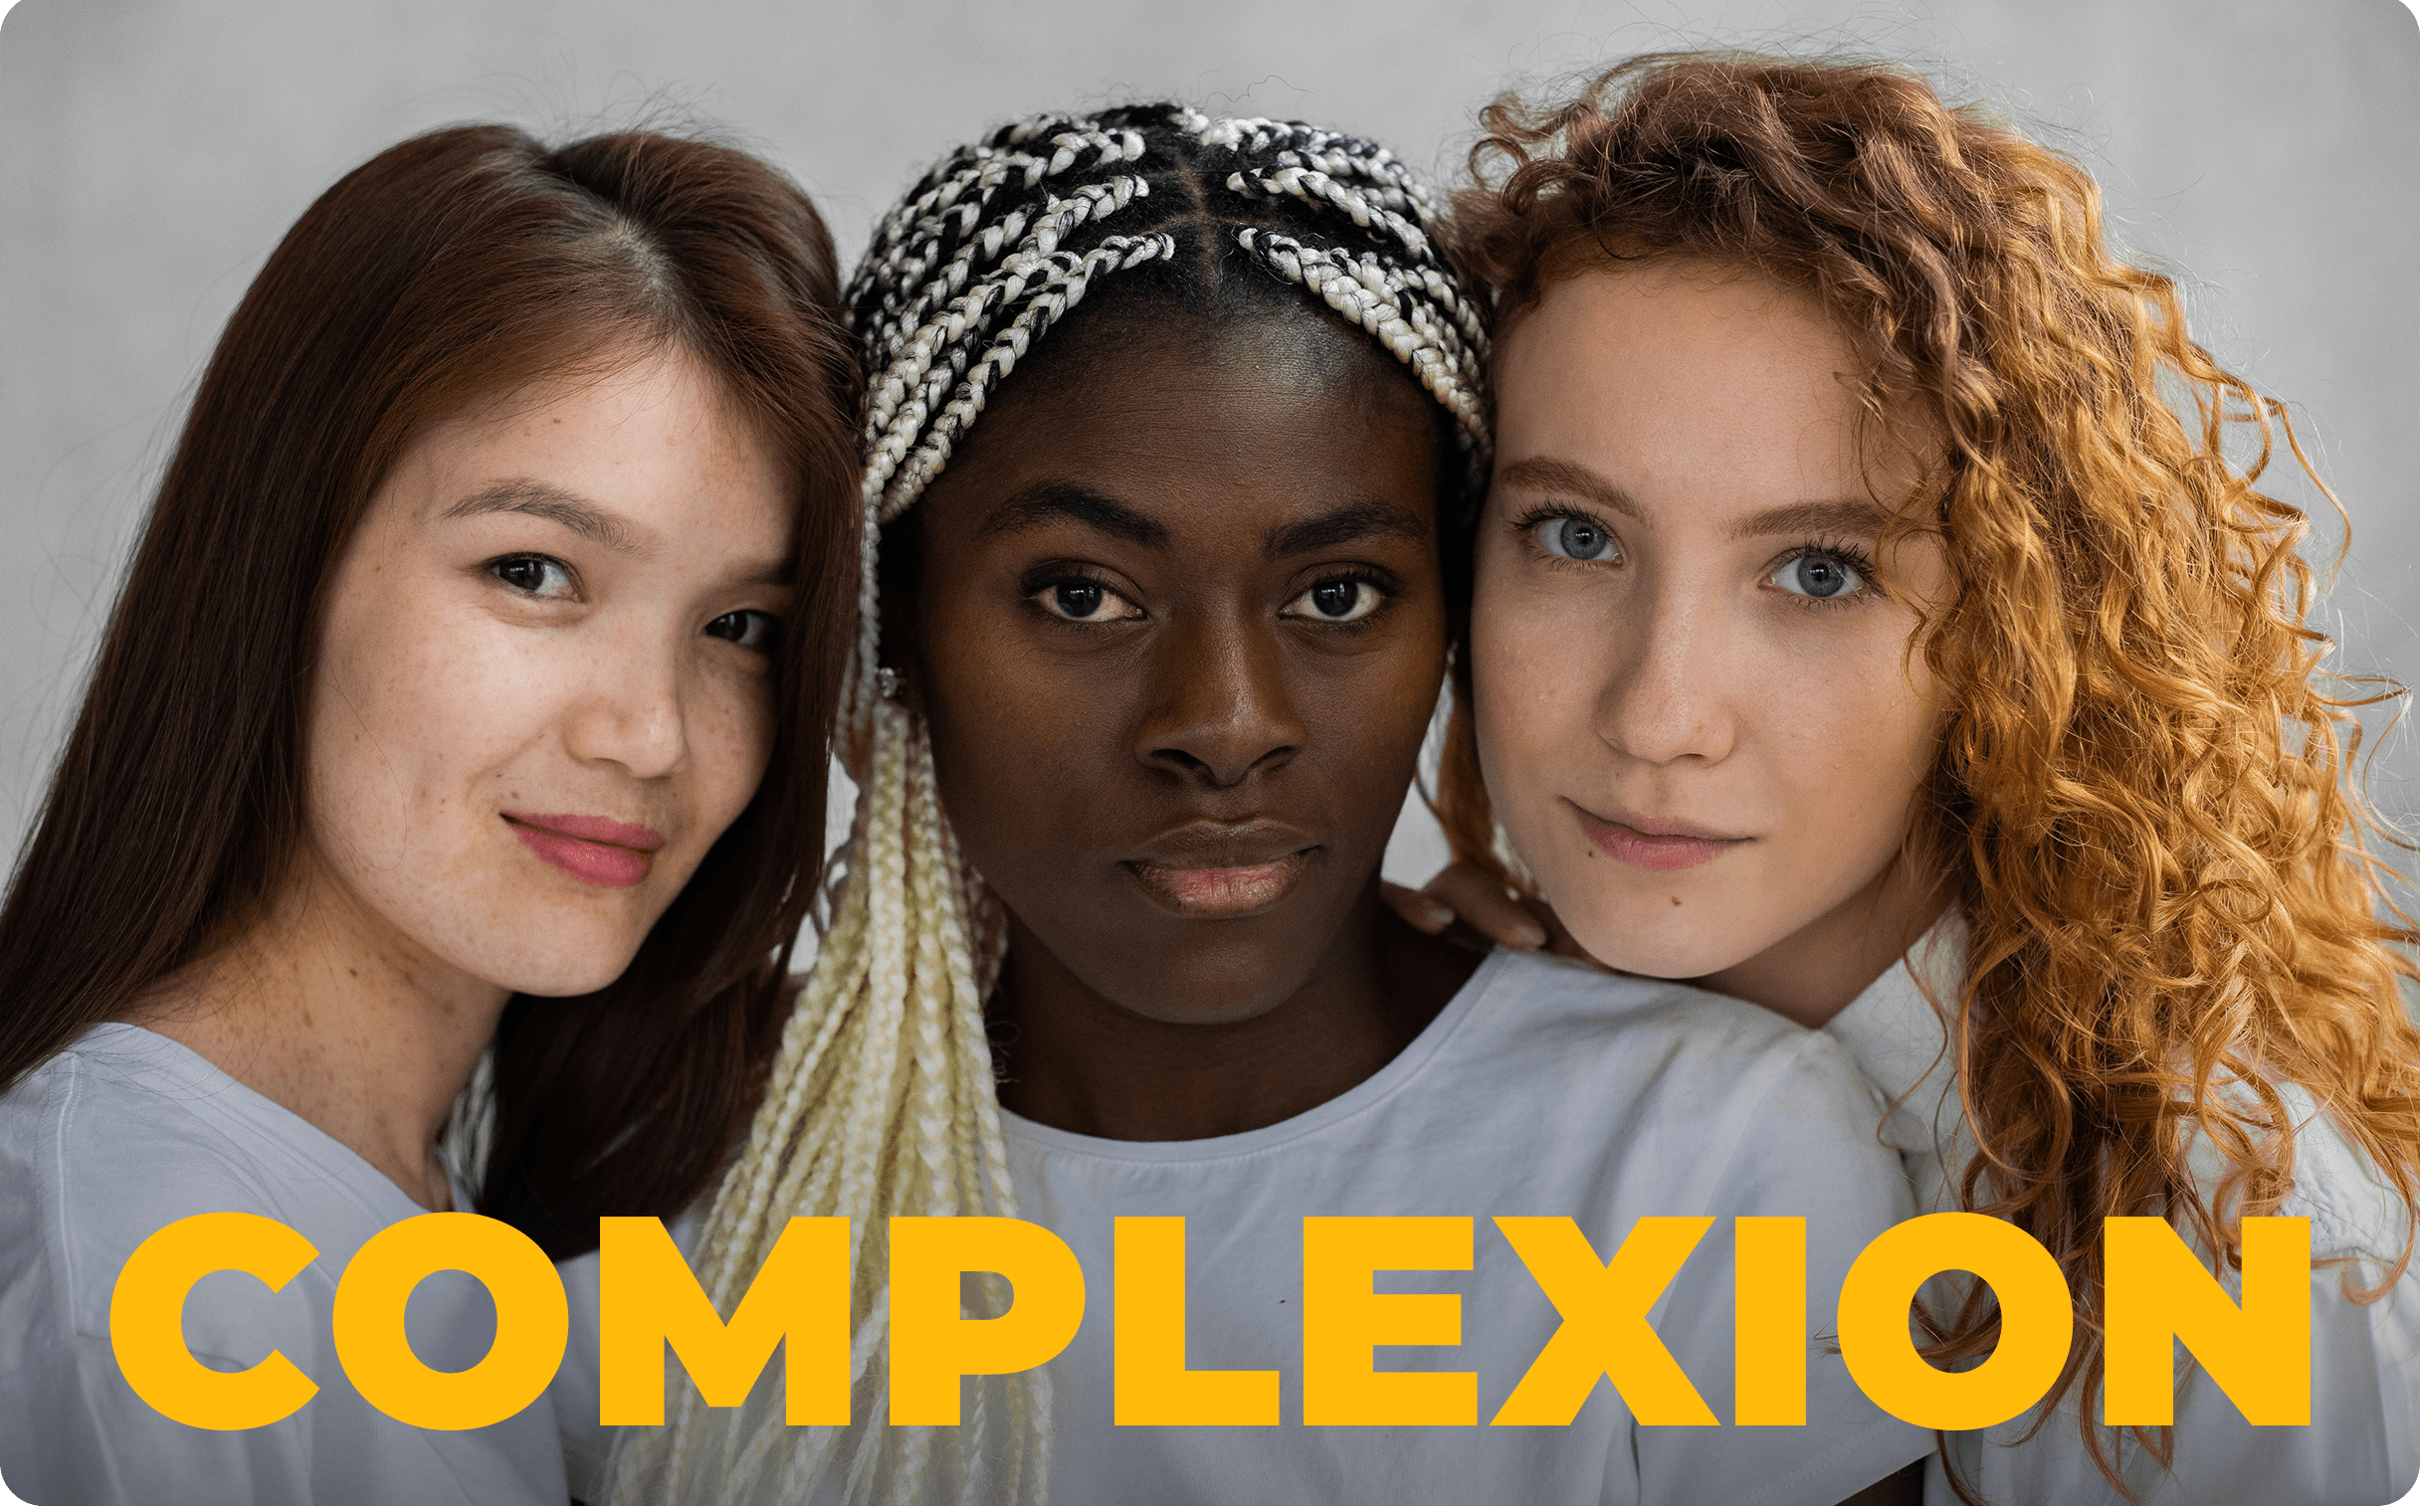 Understanding complexion: Essential words and phrases for discussing skin tone